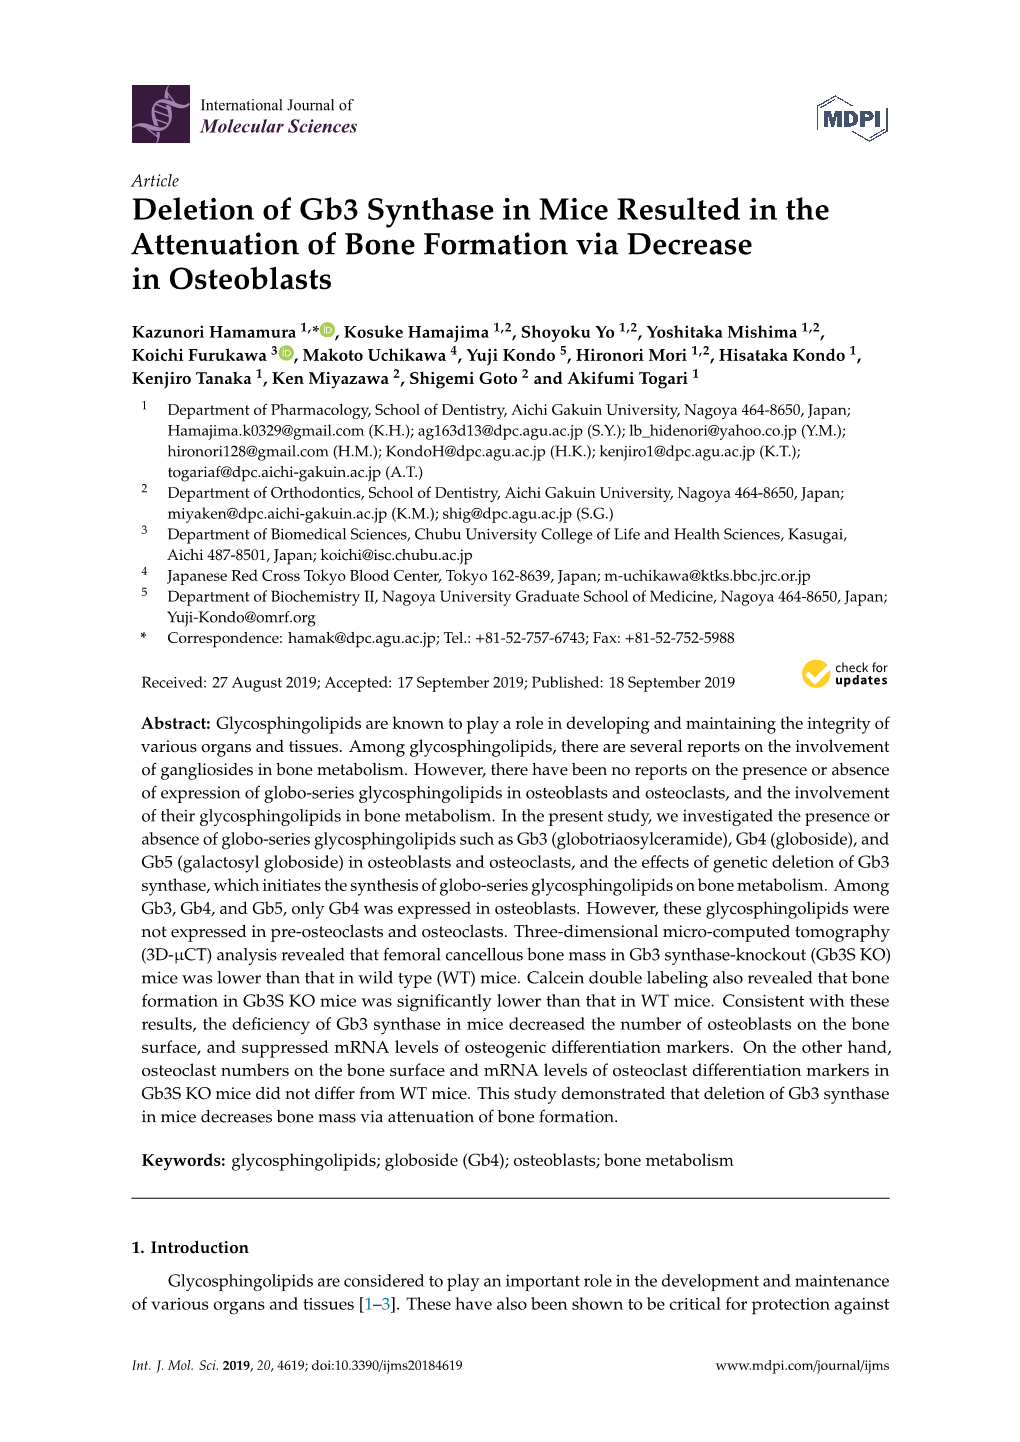 Deletion of Gb3 Synthase in Mice Resulted in the Attenuation of Bone Formation Via Decrease in Osteoblasts